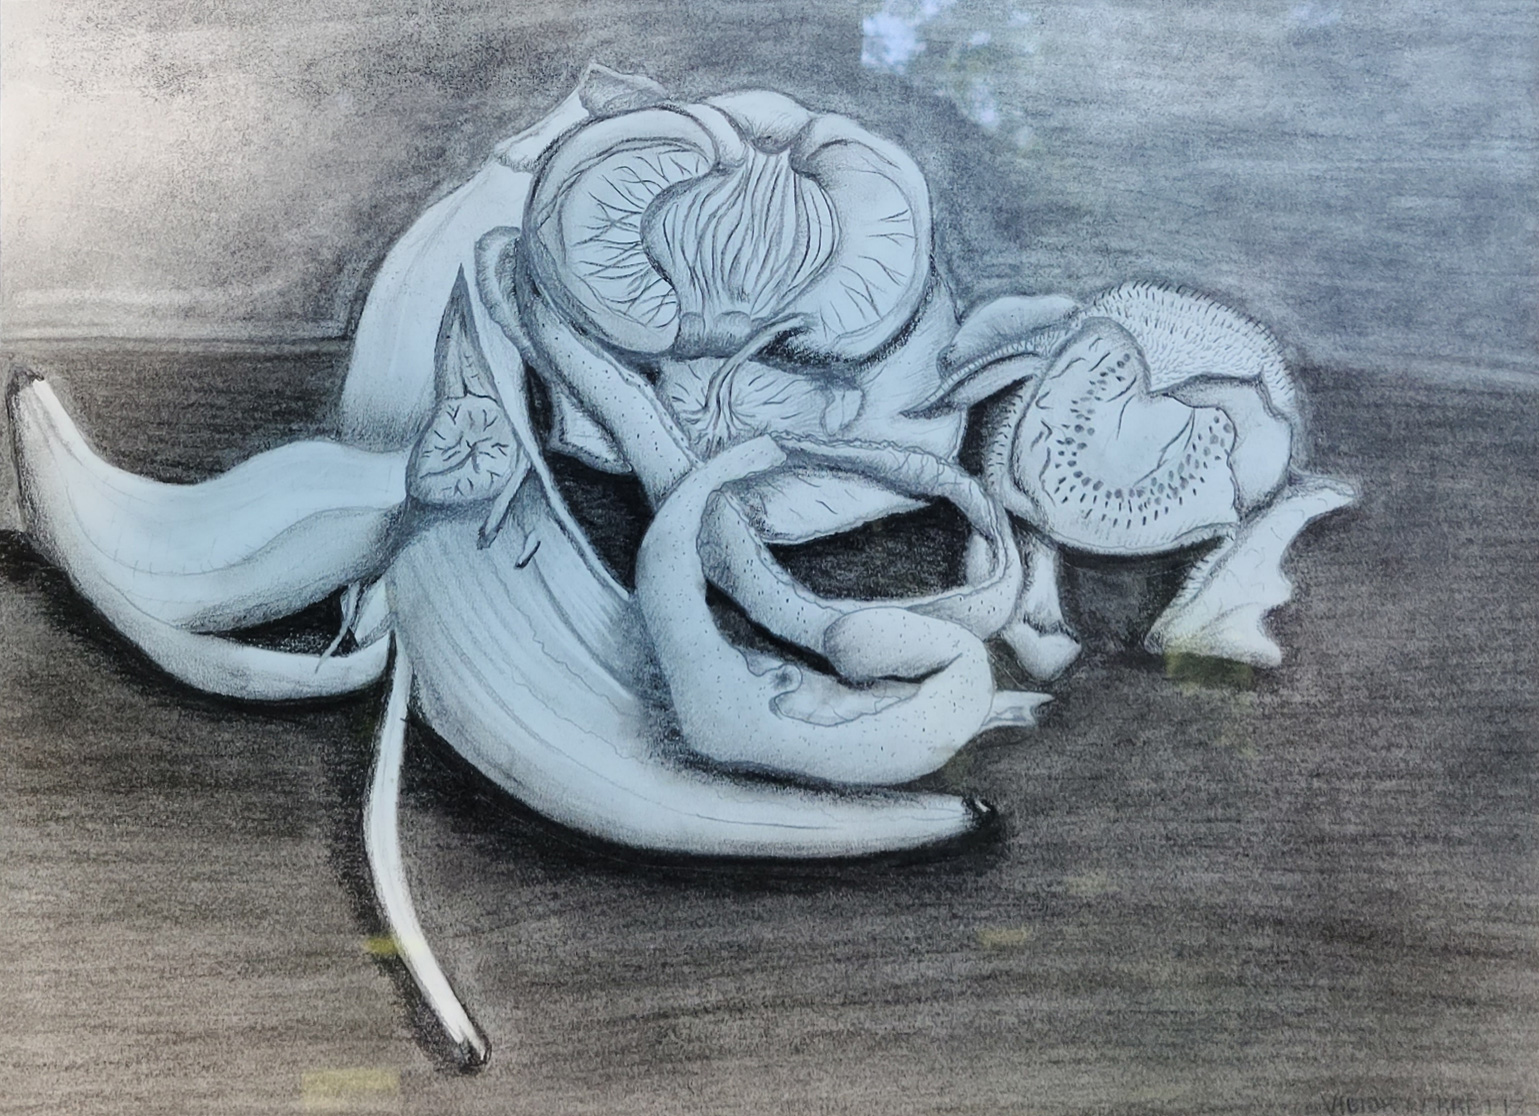 This original artwork was drawn with charcoal and pencil on drawing paper. This drawing is a set of bananas, kiwis, and tangerines that form a gestation of a baby. This drawing symbolizes the health and good nutrition that a baby in the gestation process must receive in order to be more likely to be born healthy and strong.